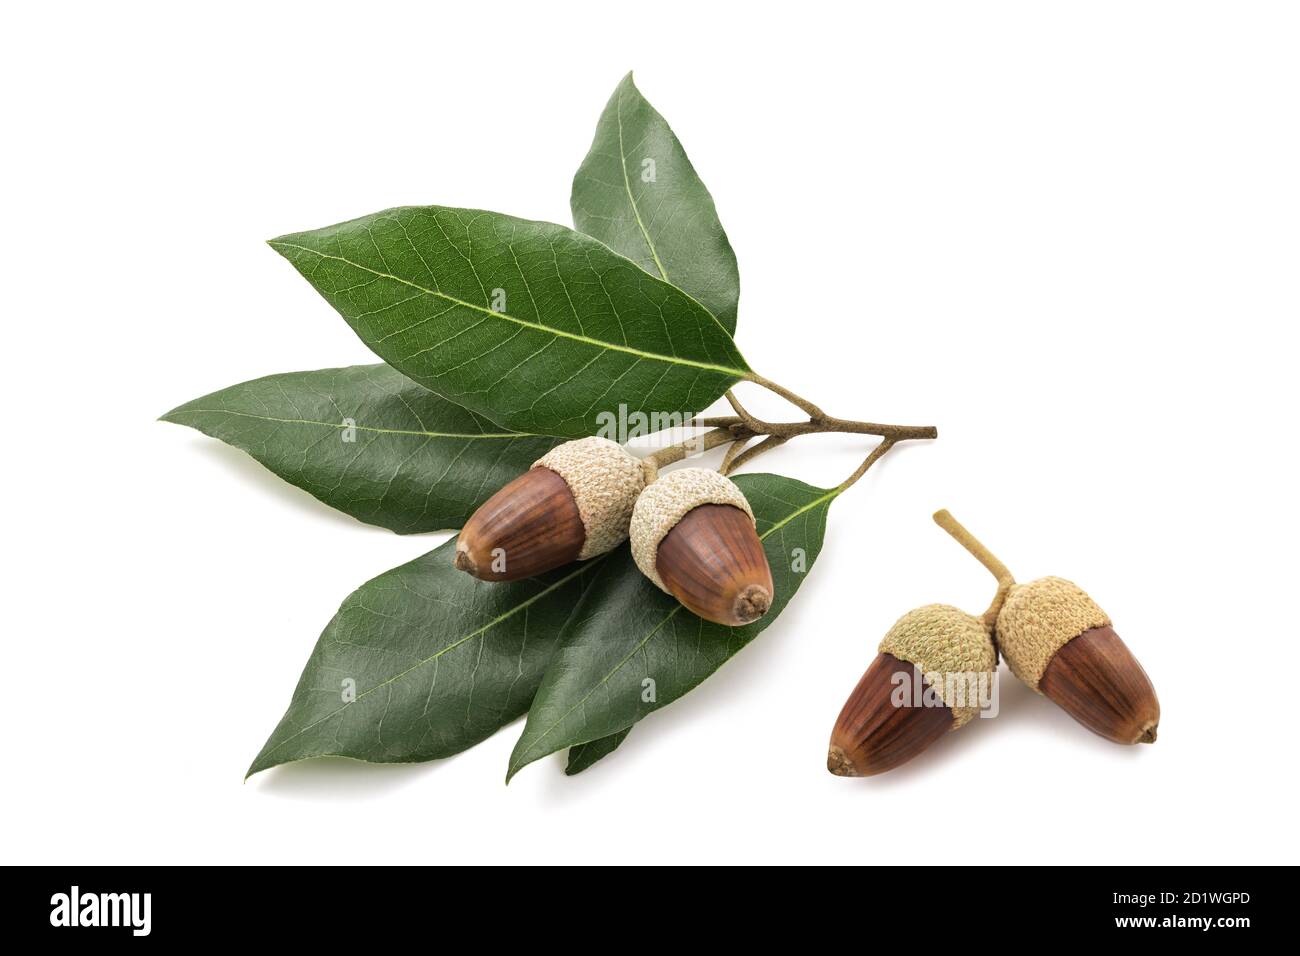 holm oak branch with  acorns isolated on white background Stock Photo